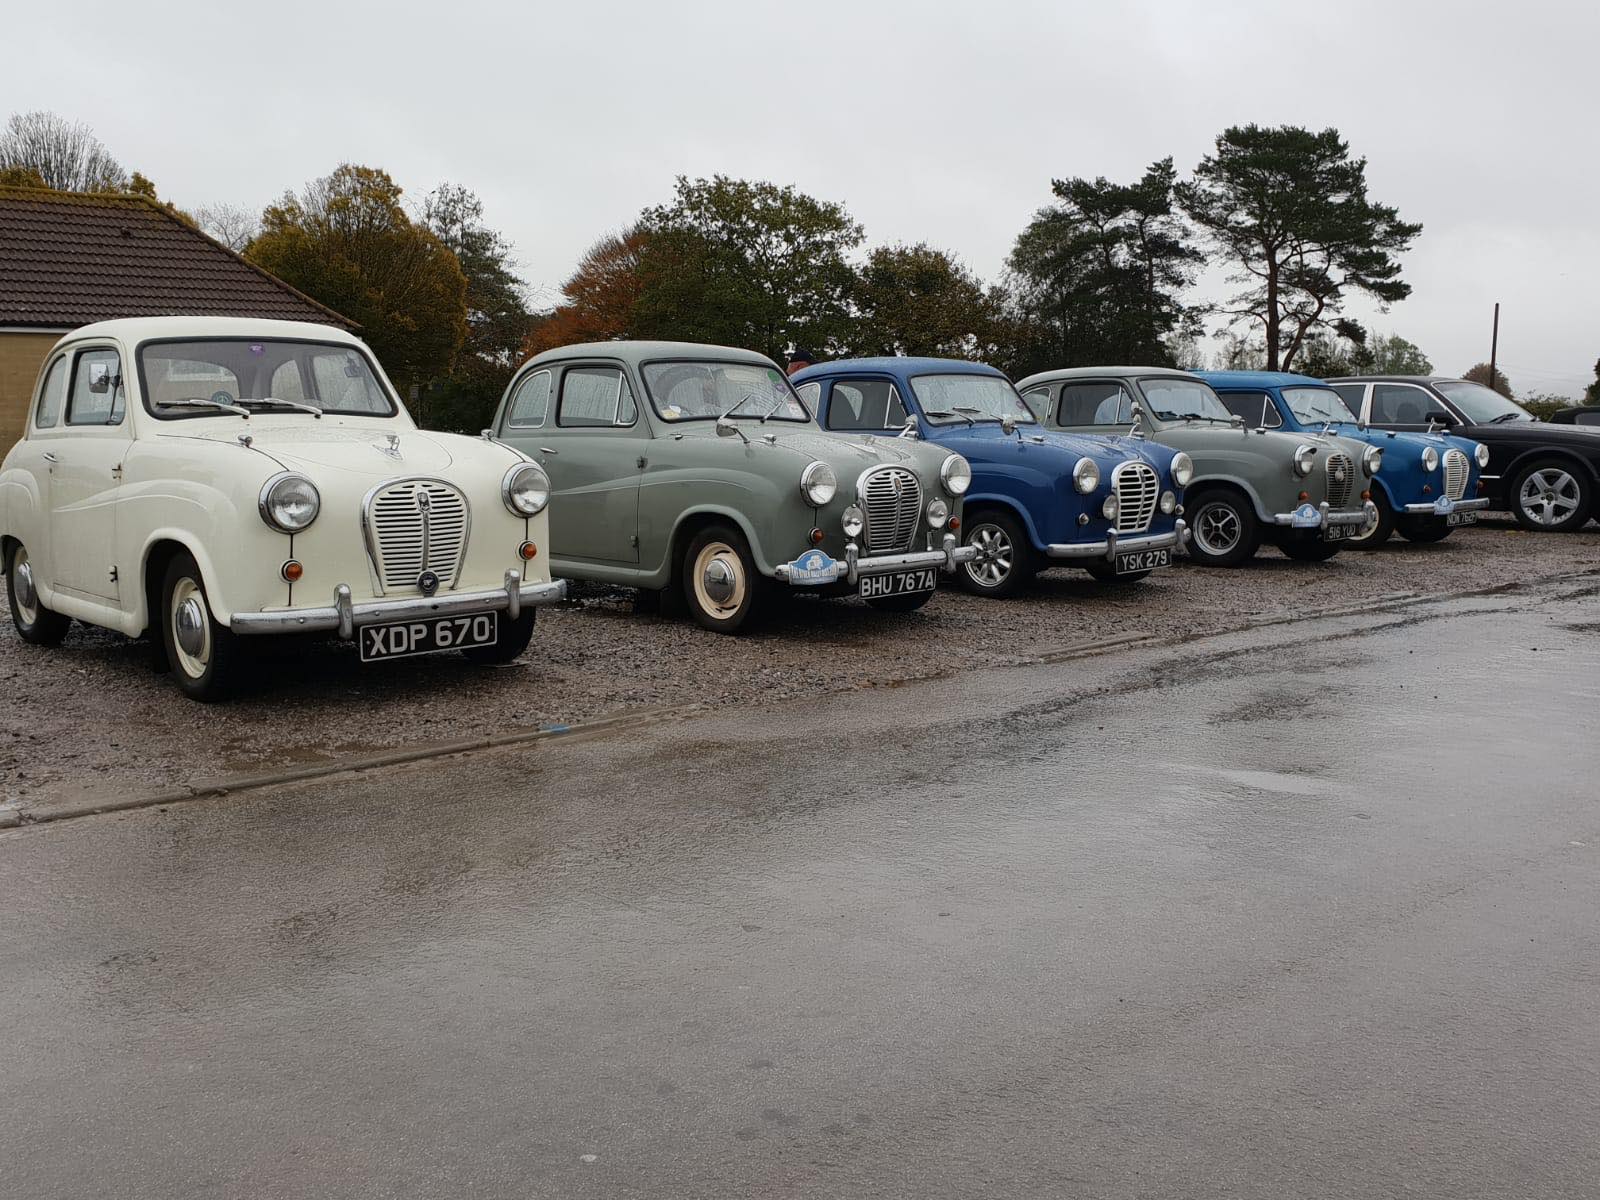 A classic line up